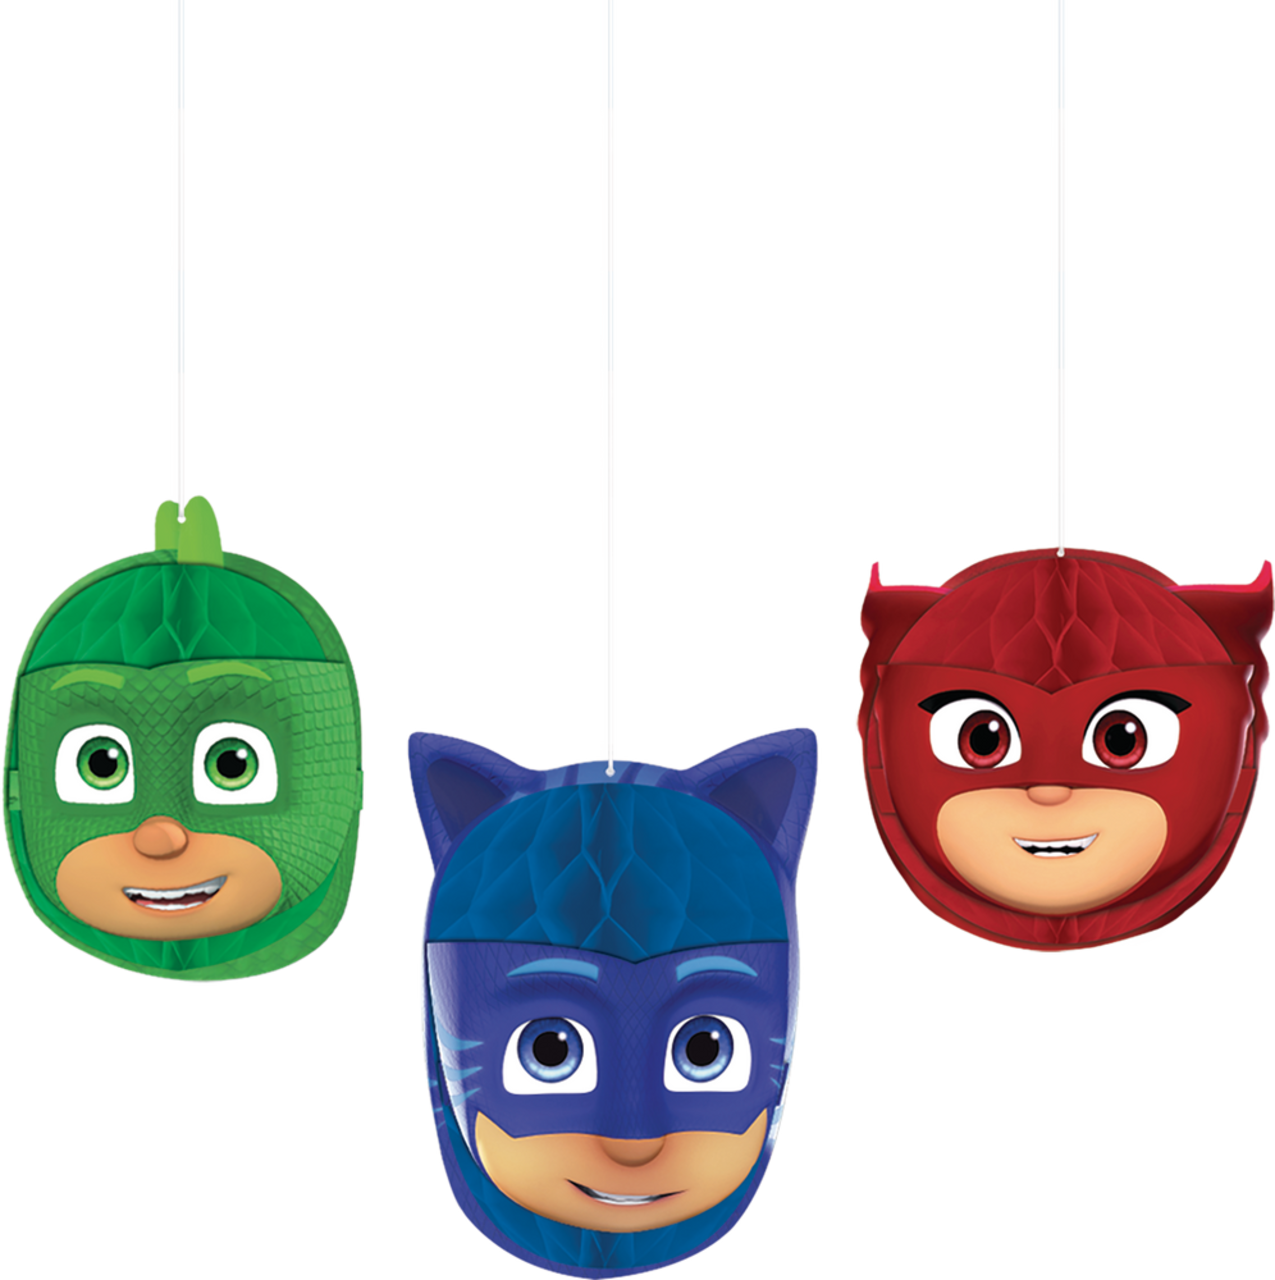 https://media-www.canadiantire.ca/product/seasonal-gardening/party-city-everyday/party-city-party-supplies-decor/8436600/pj-masks-honeycomb-balls-3ct-235366e6-e647-4bd2-8e24-b5326356ca1a.png?imdensity=1&imwidth=640&impolicy=mZoom